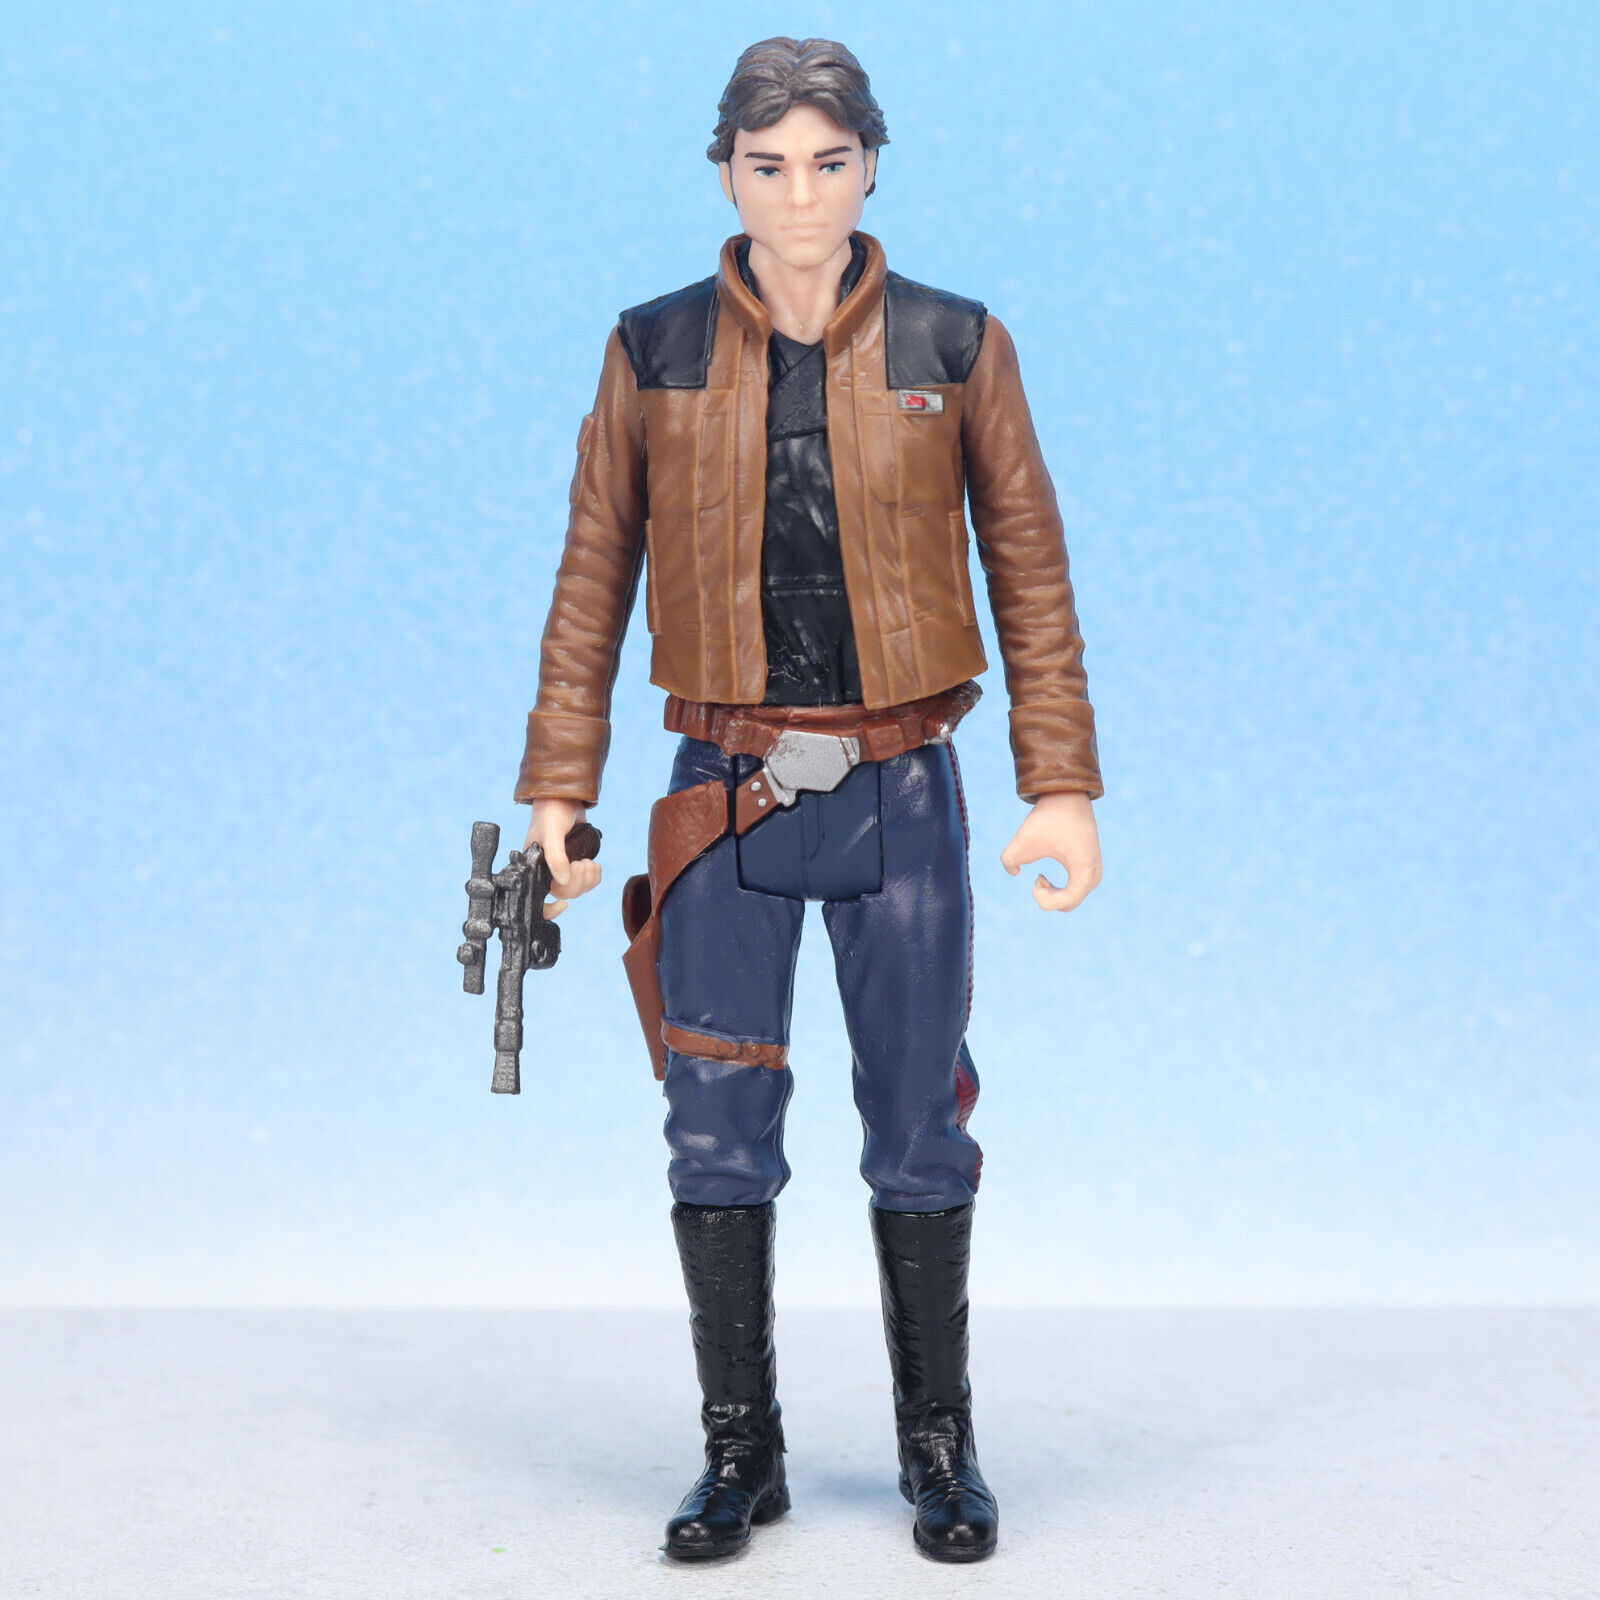 Magnificent Solo: A Star Wars Story Force Link 2.0 HAN SOLO 3.75″ Action Figure Hasbro 2018 on eBay